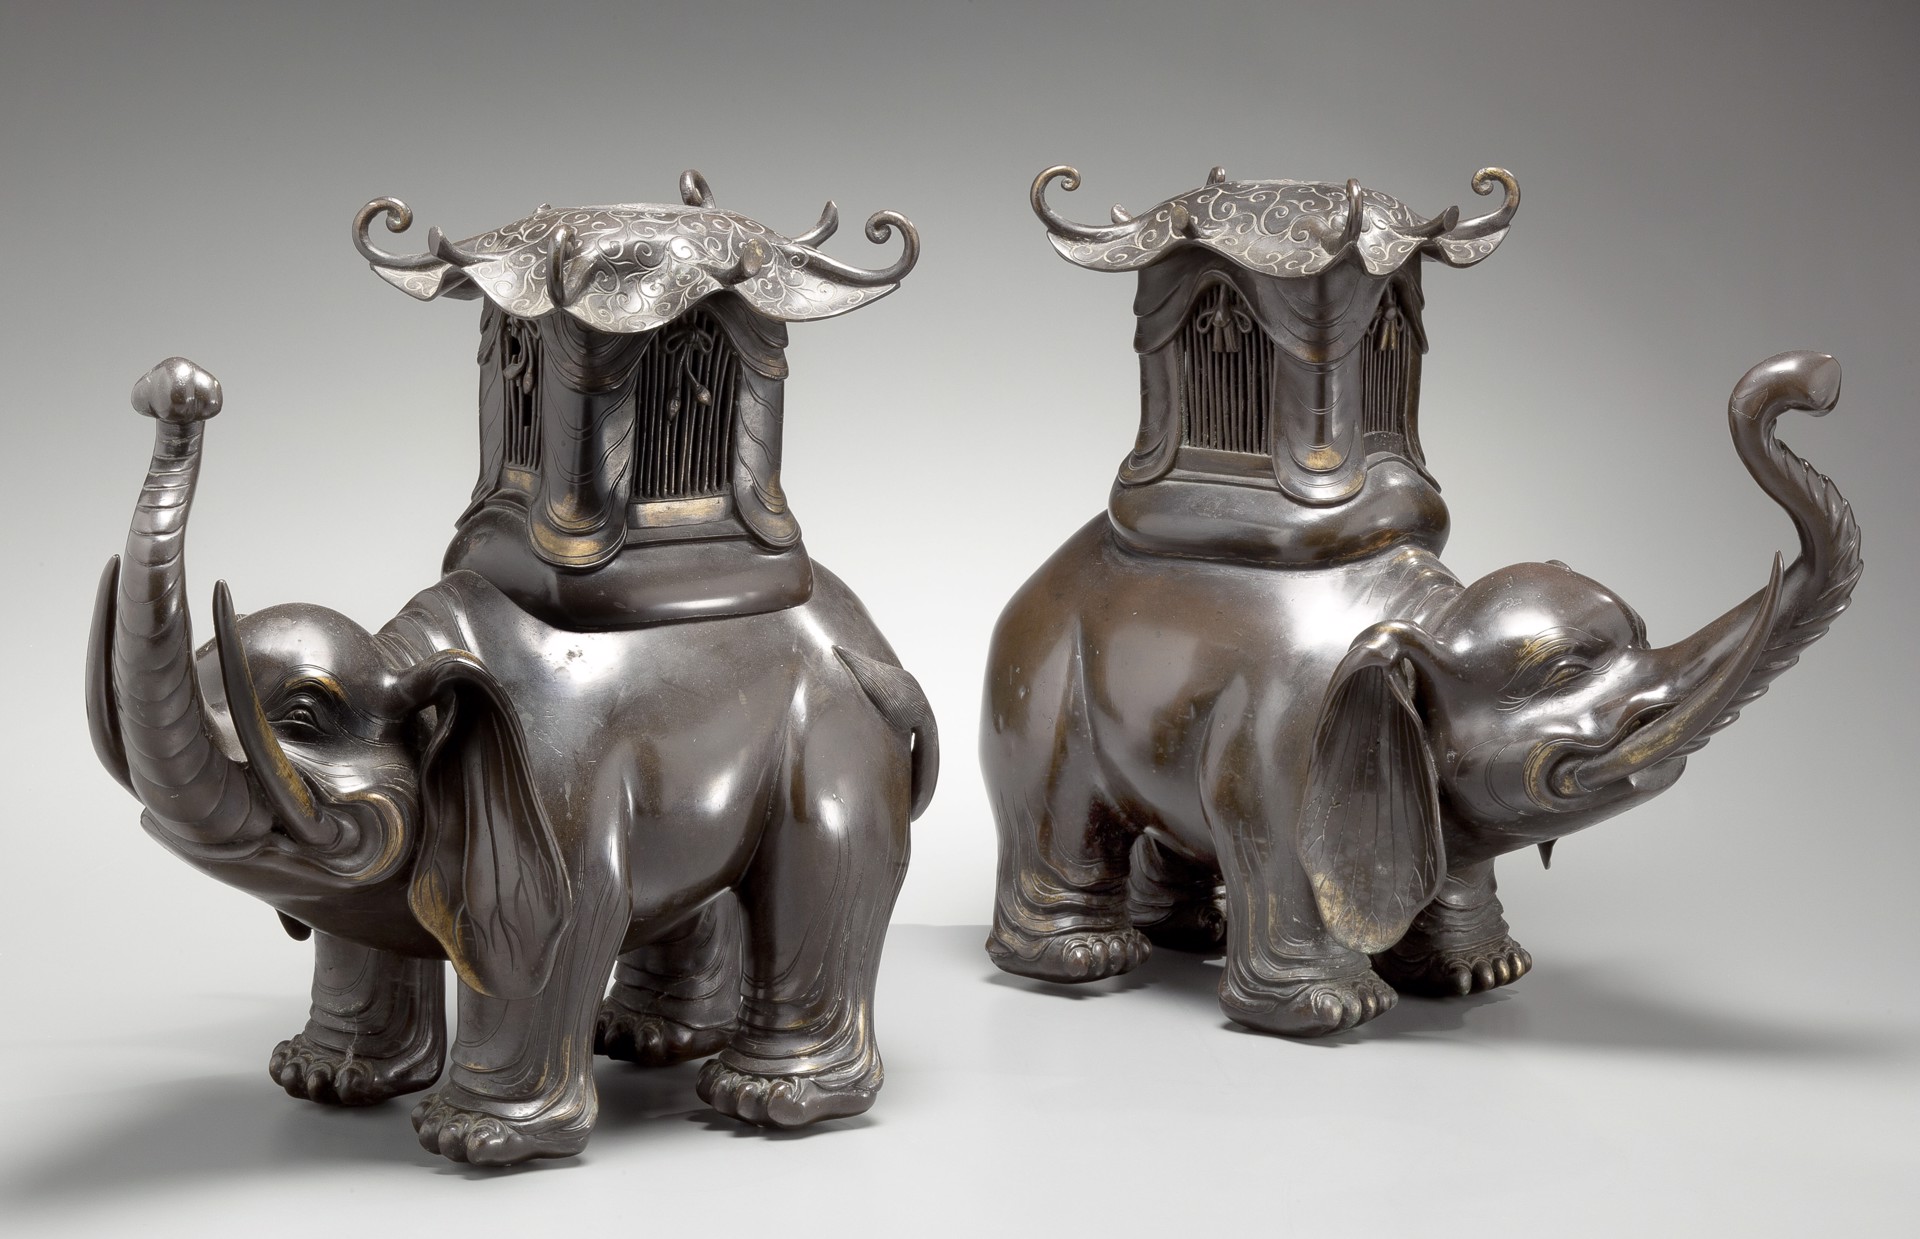 COMPANION PAIR OF JAPANESE BRONZE LAMPS IN THE FORMS OF ELEPHANTS